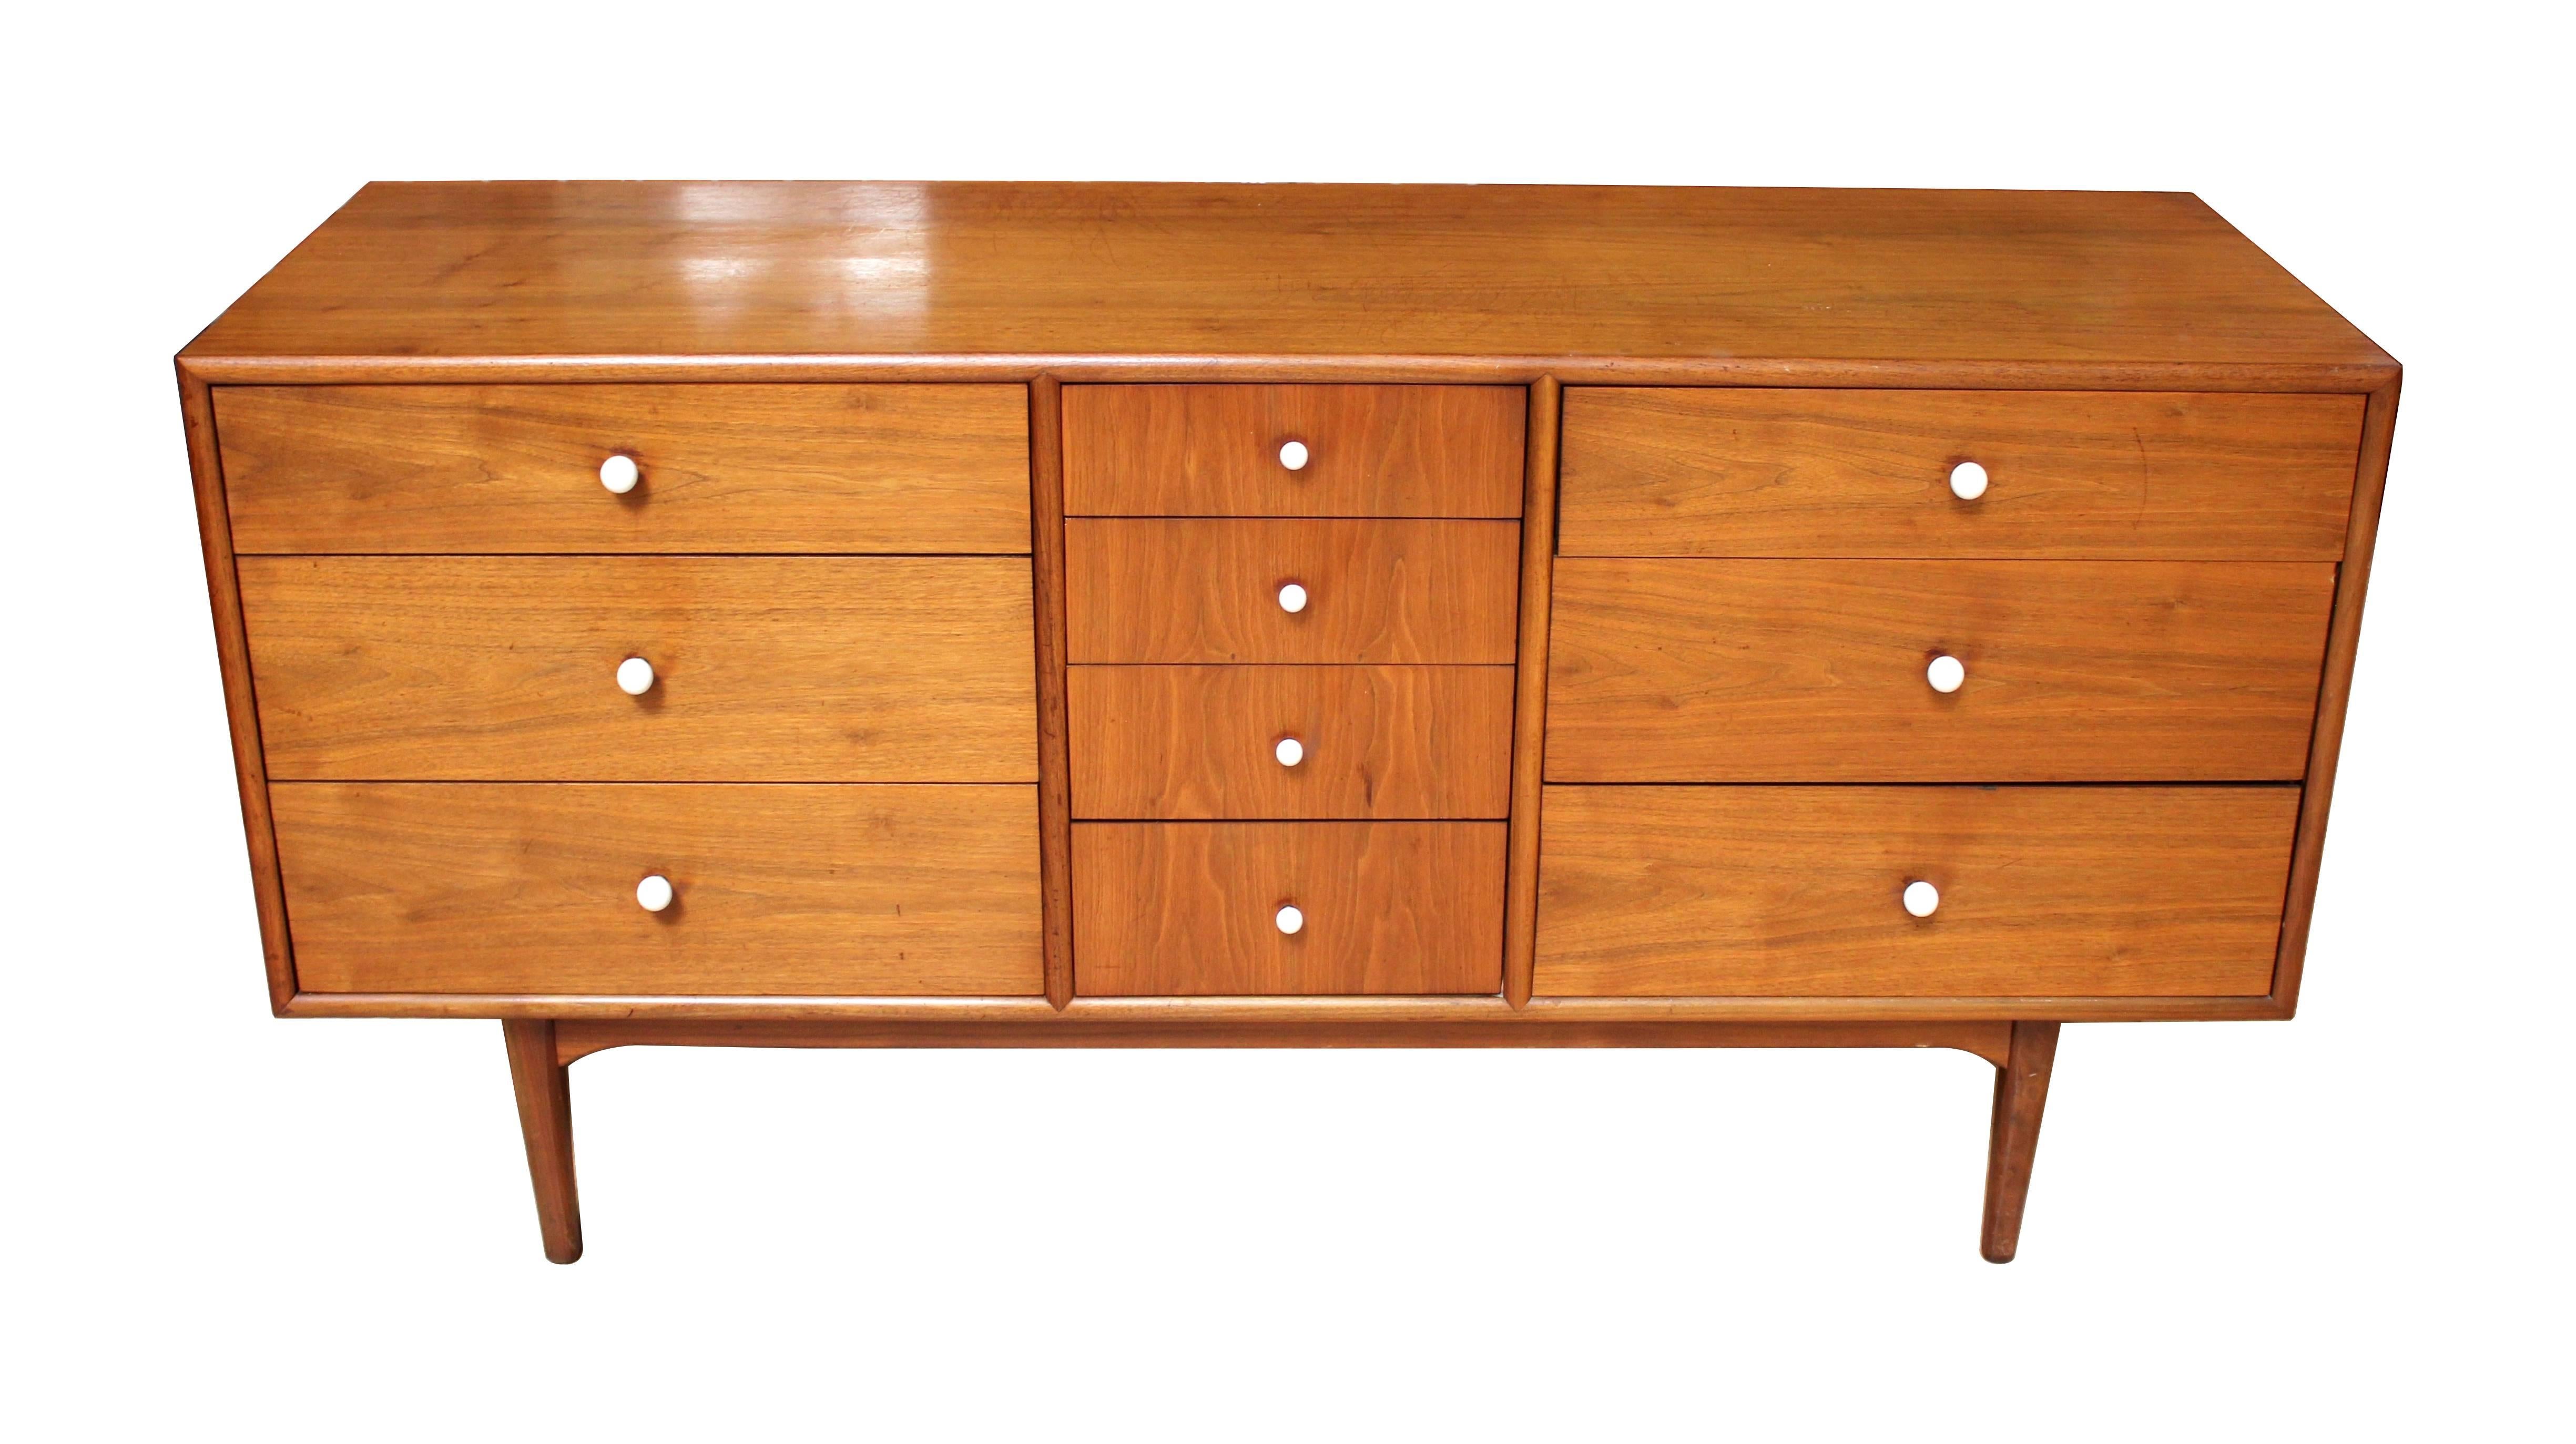 1964, ten-drawer walnut dresser designed by Kipp Stewart and Stewart McDougall for Drexel Declaration. Beautiful walnut wood grain and the signature declaration white porcelain pulls. Some light scratching to top, as shown in pictures.
 